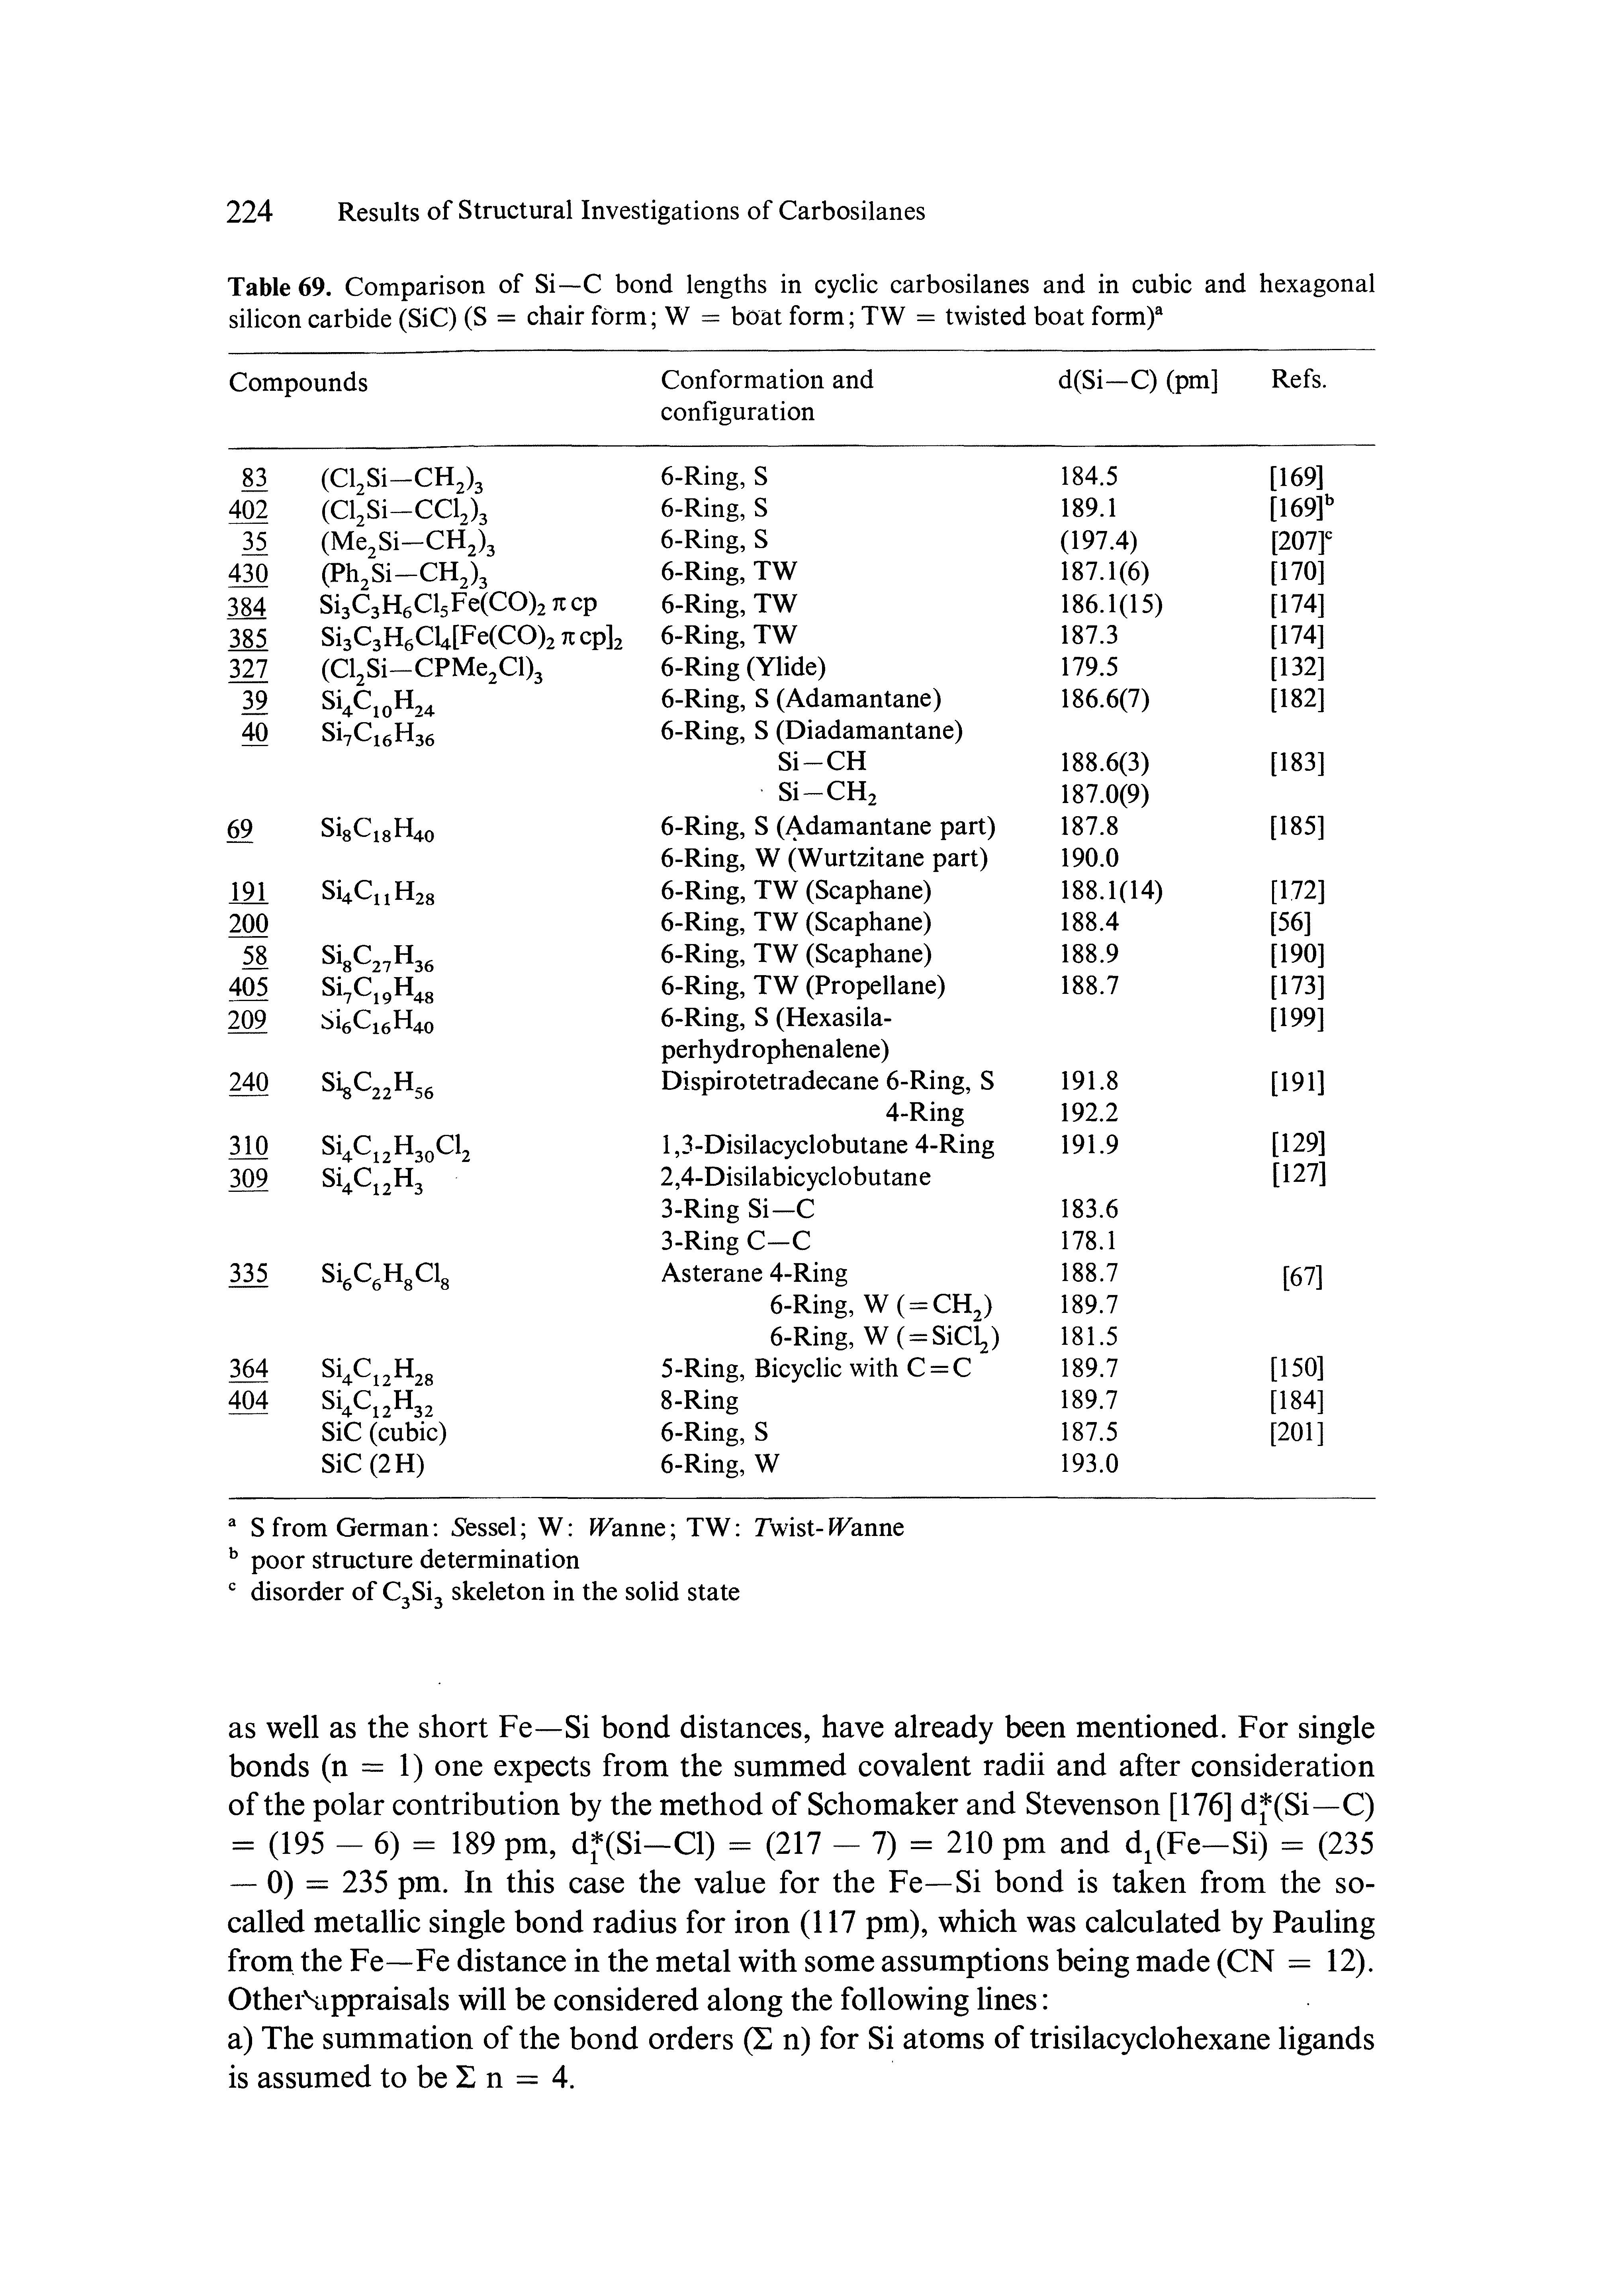 Table 69. Comparison of Si—C bond lengths in cyclic carbosilanes and in cubic and hexagonal silicon carbide (SiC) (S = chair form W = boat form TW = twisted boat form) ...